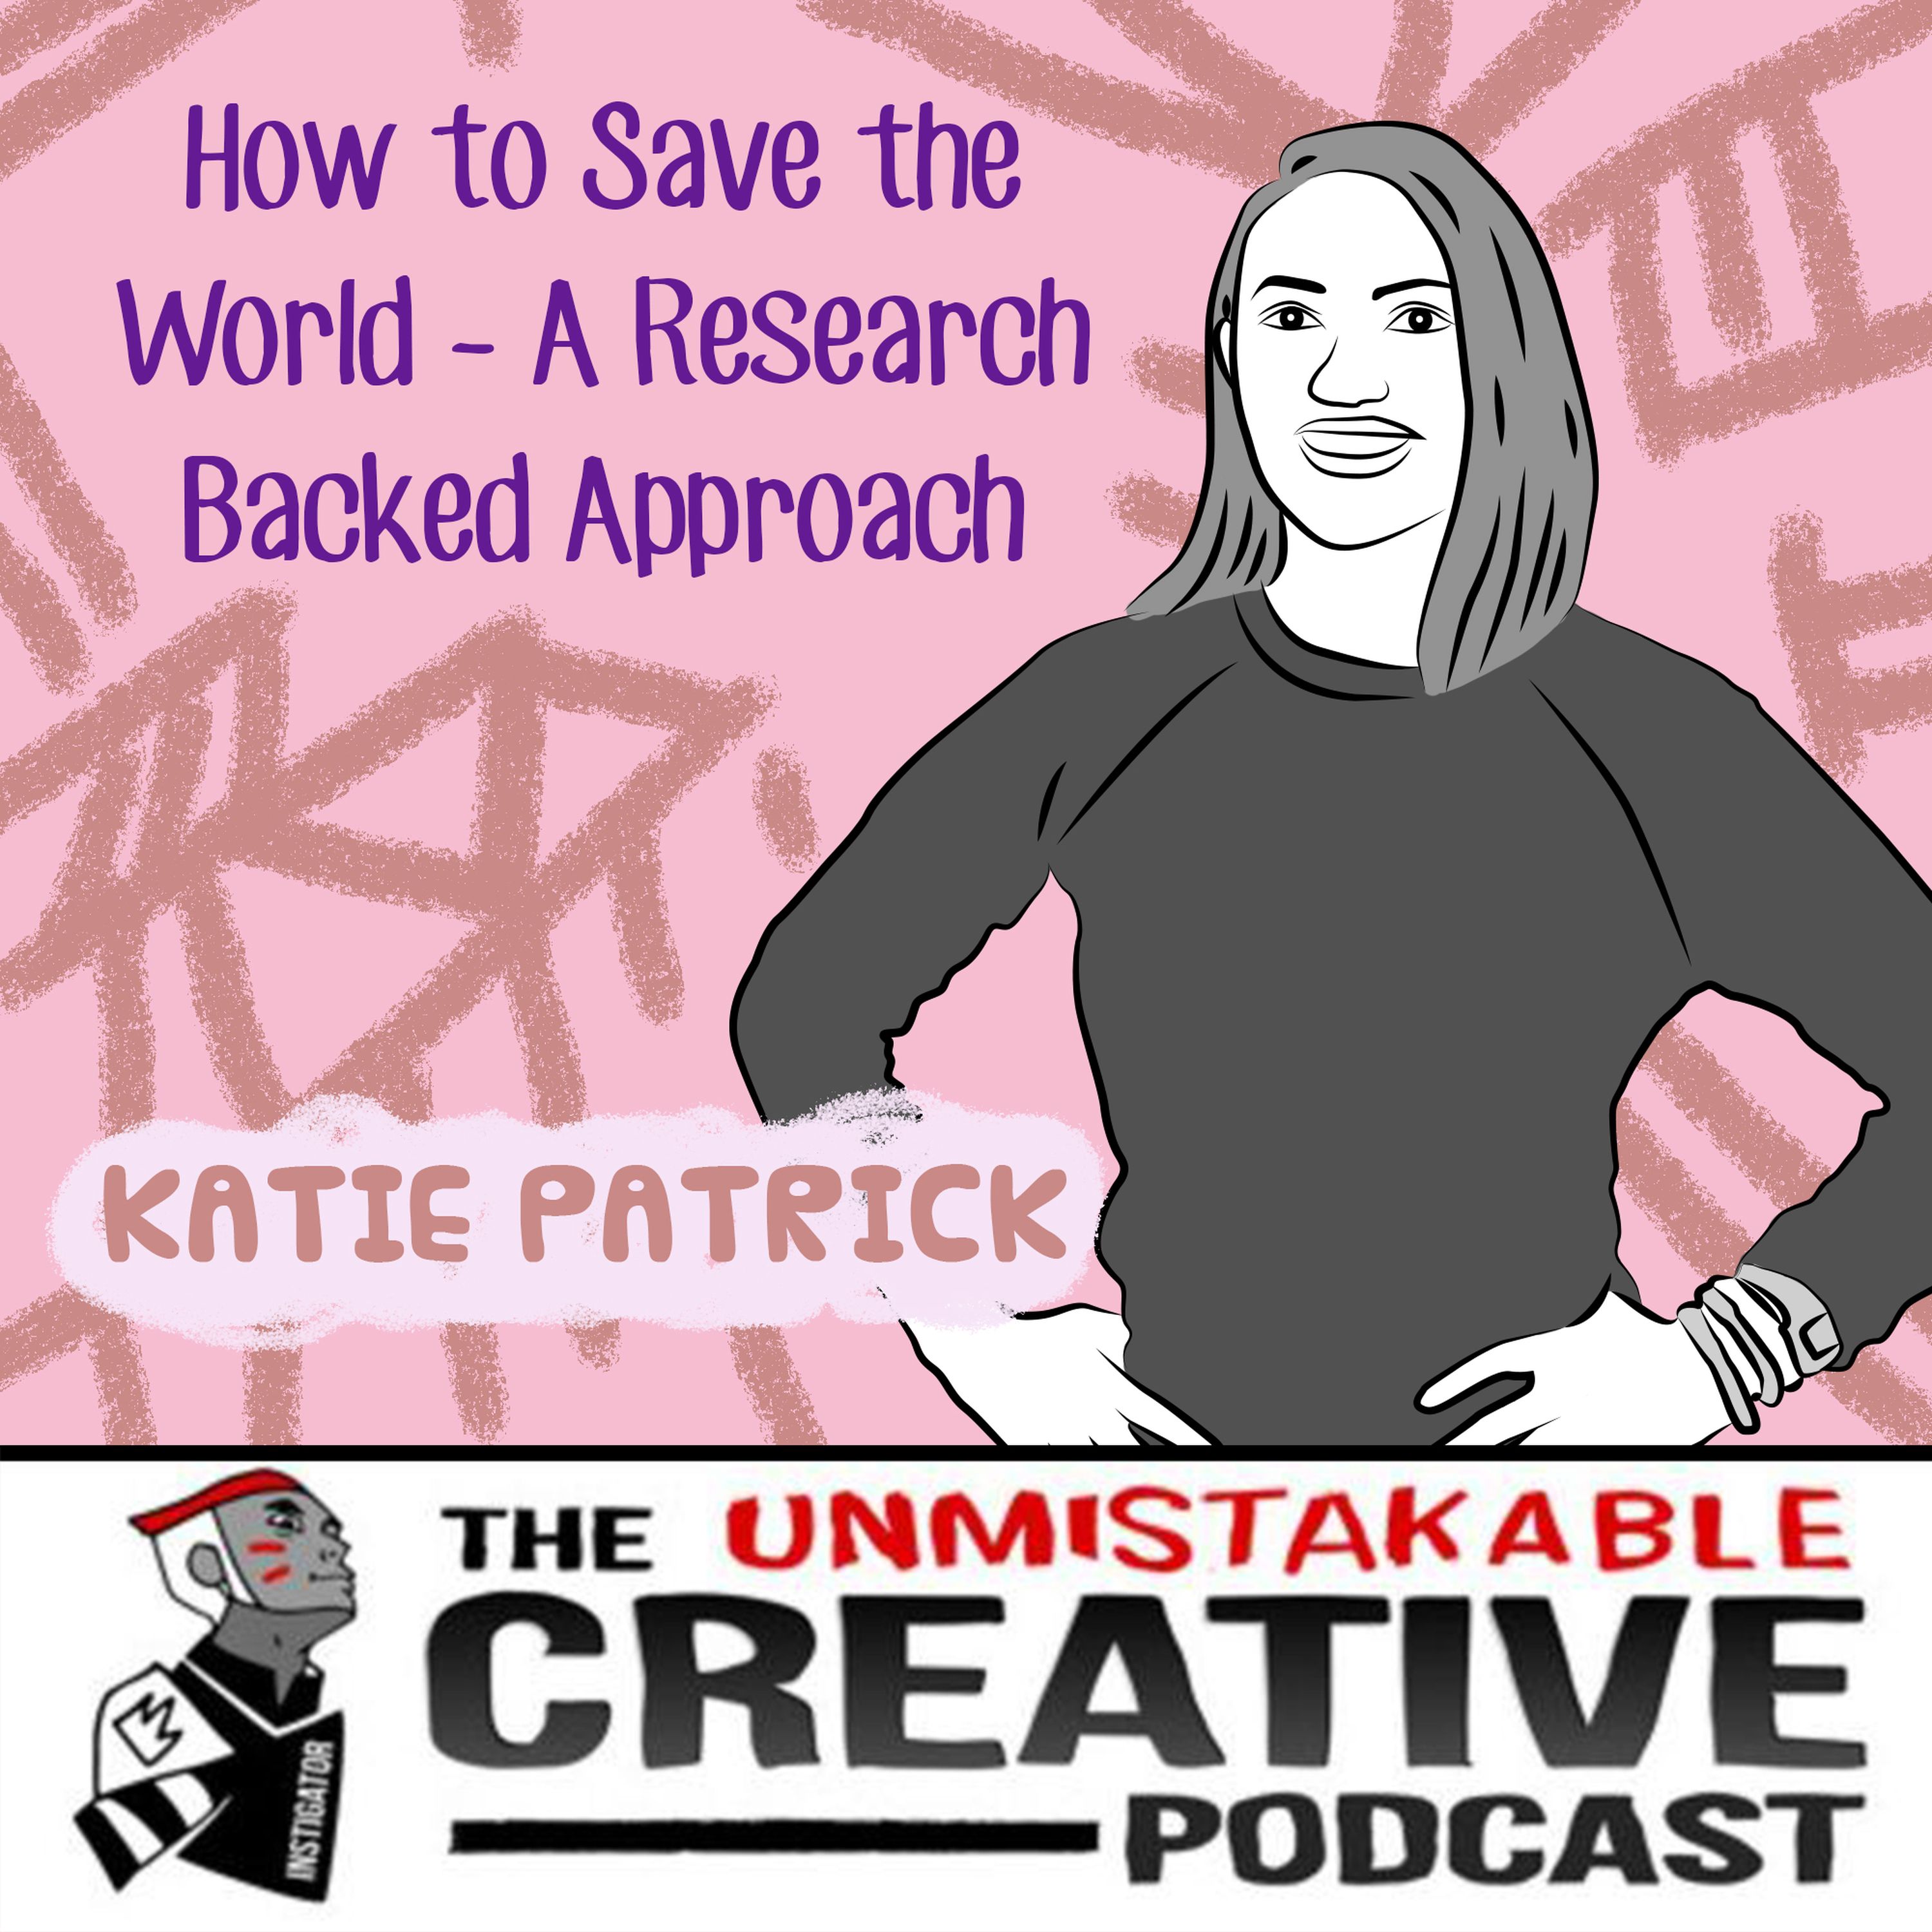 Best of 2019: Katie Patrick: How to Save the World - A Research Backed Approach